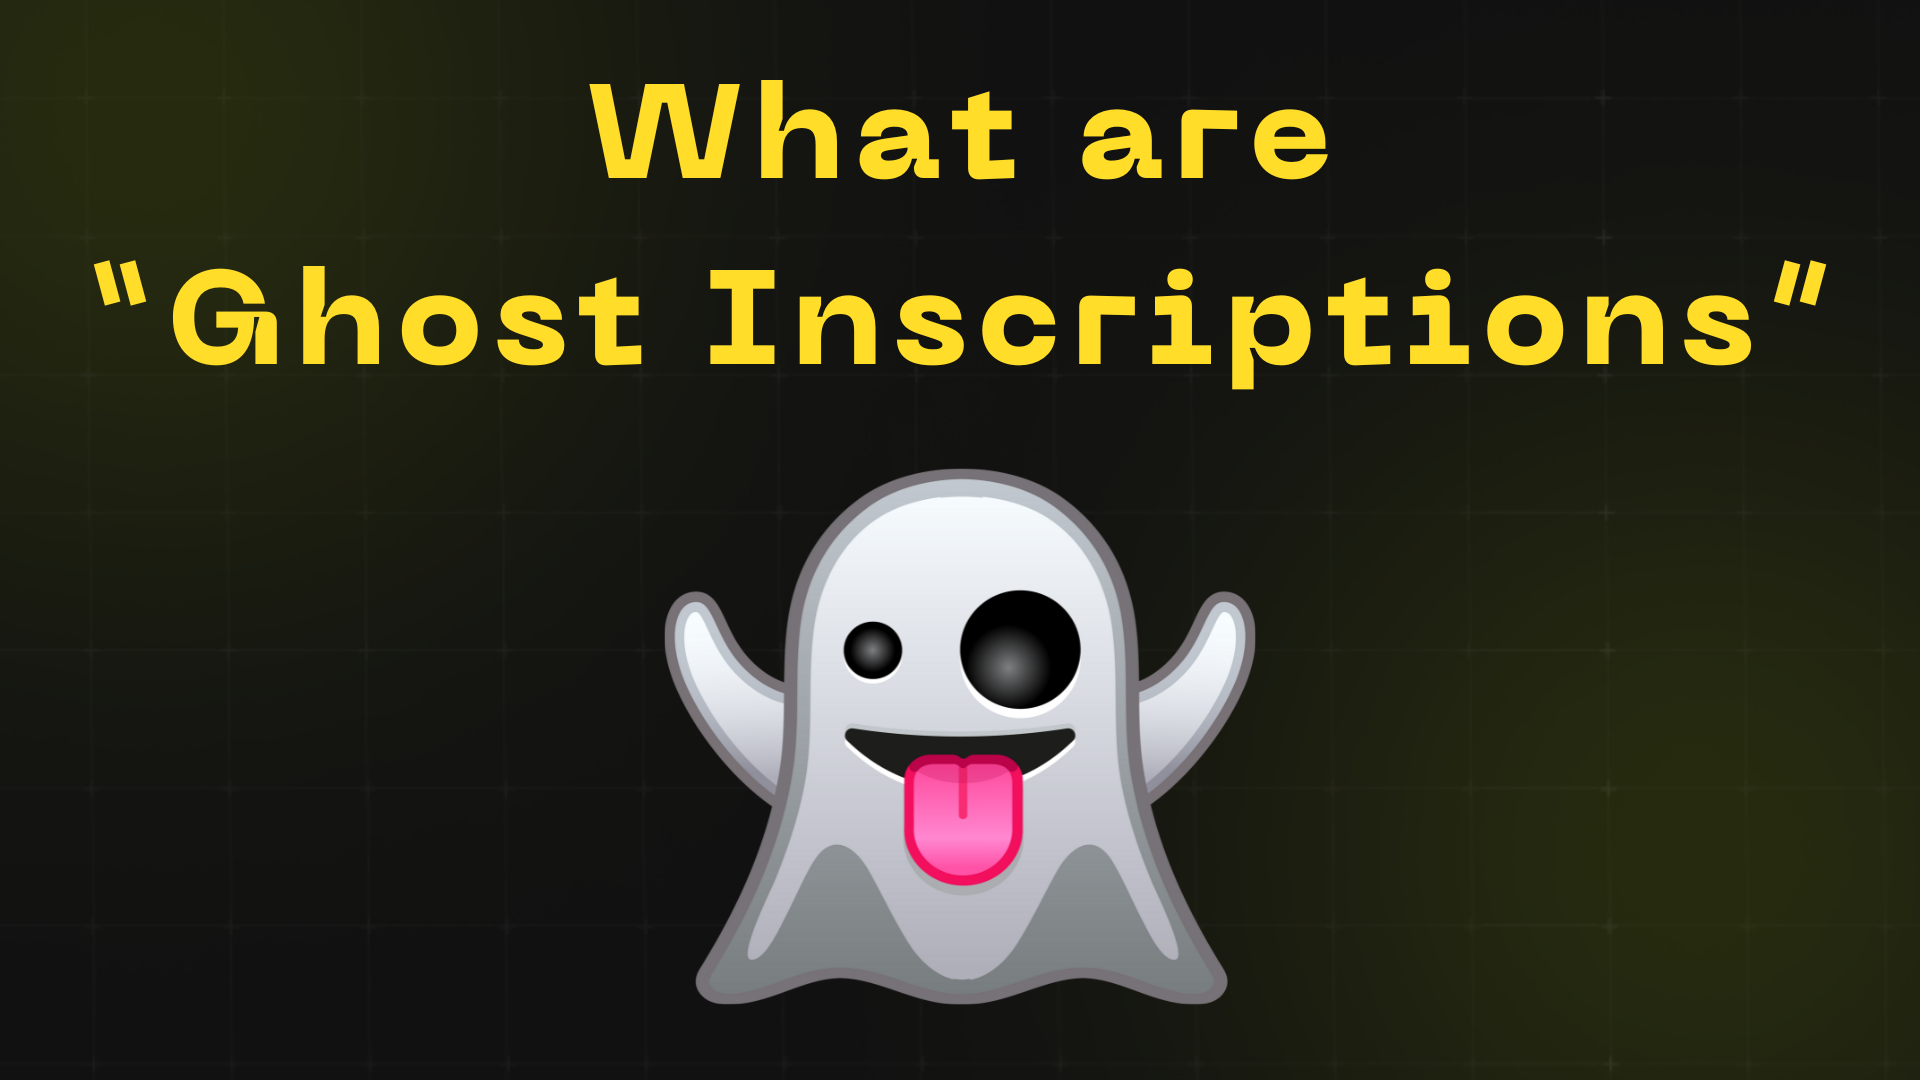 What are "Ghost Inscriptions"?